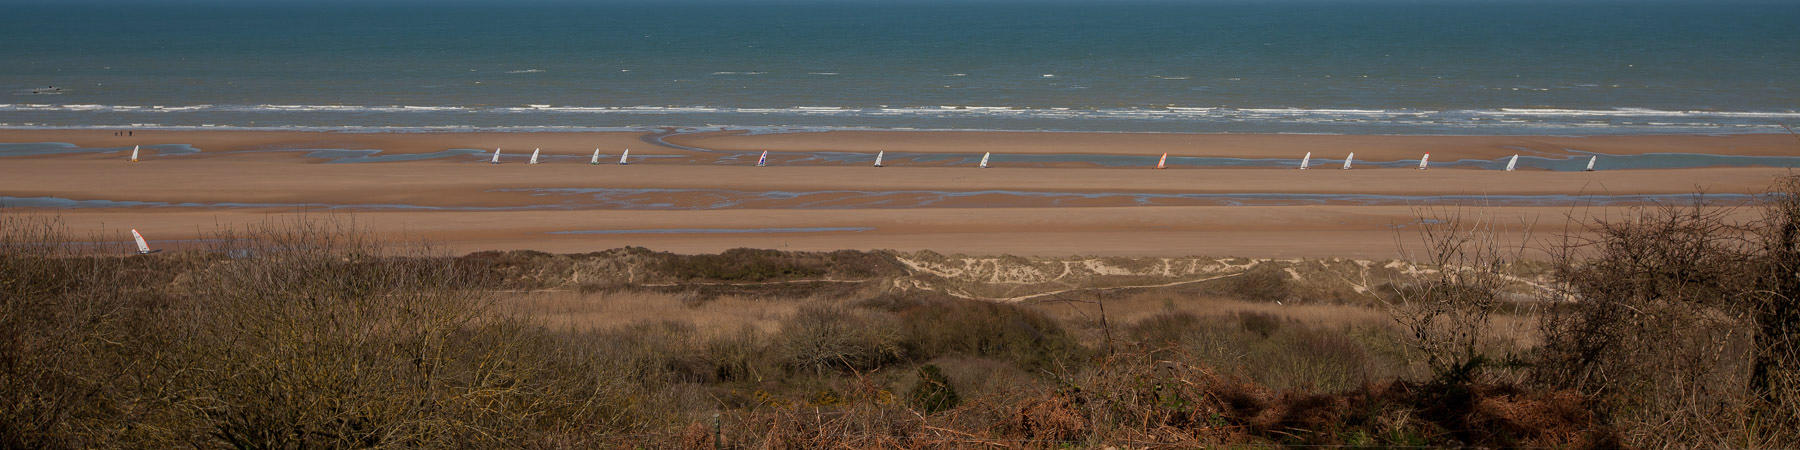 Sand yachting at Omaha Beach - Photo Pêcheur d'Images